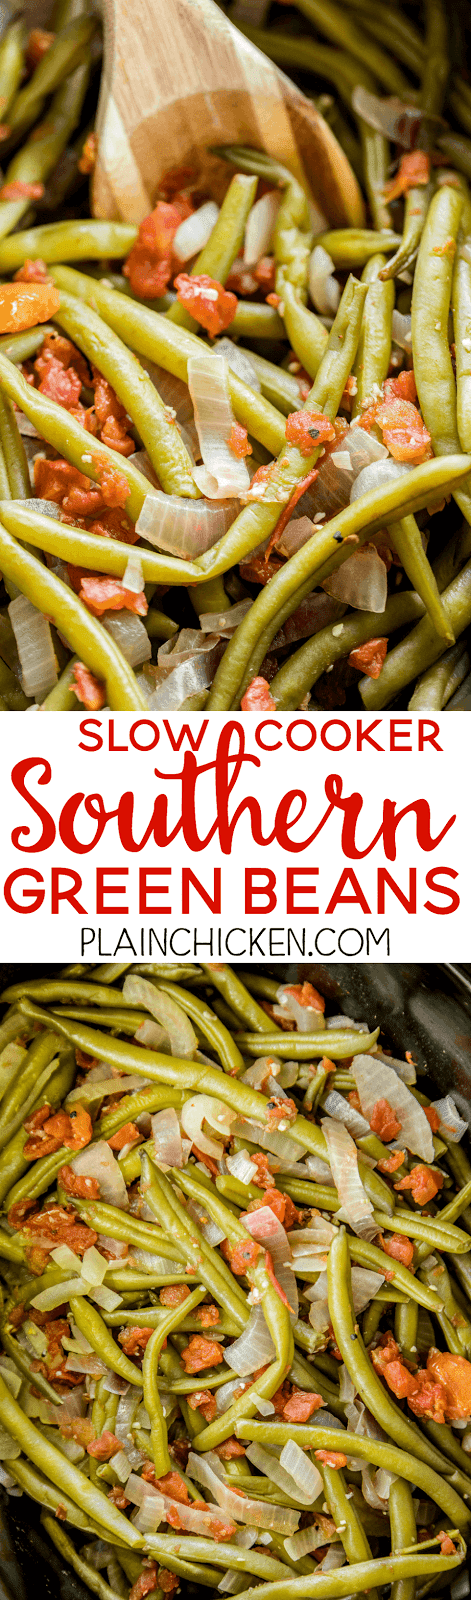 Slow Cooker Southern Green Beans - Plain Chicken